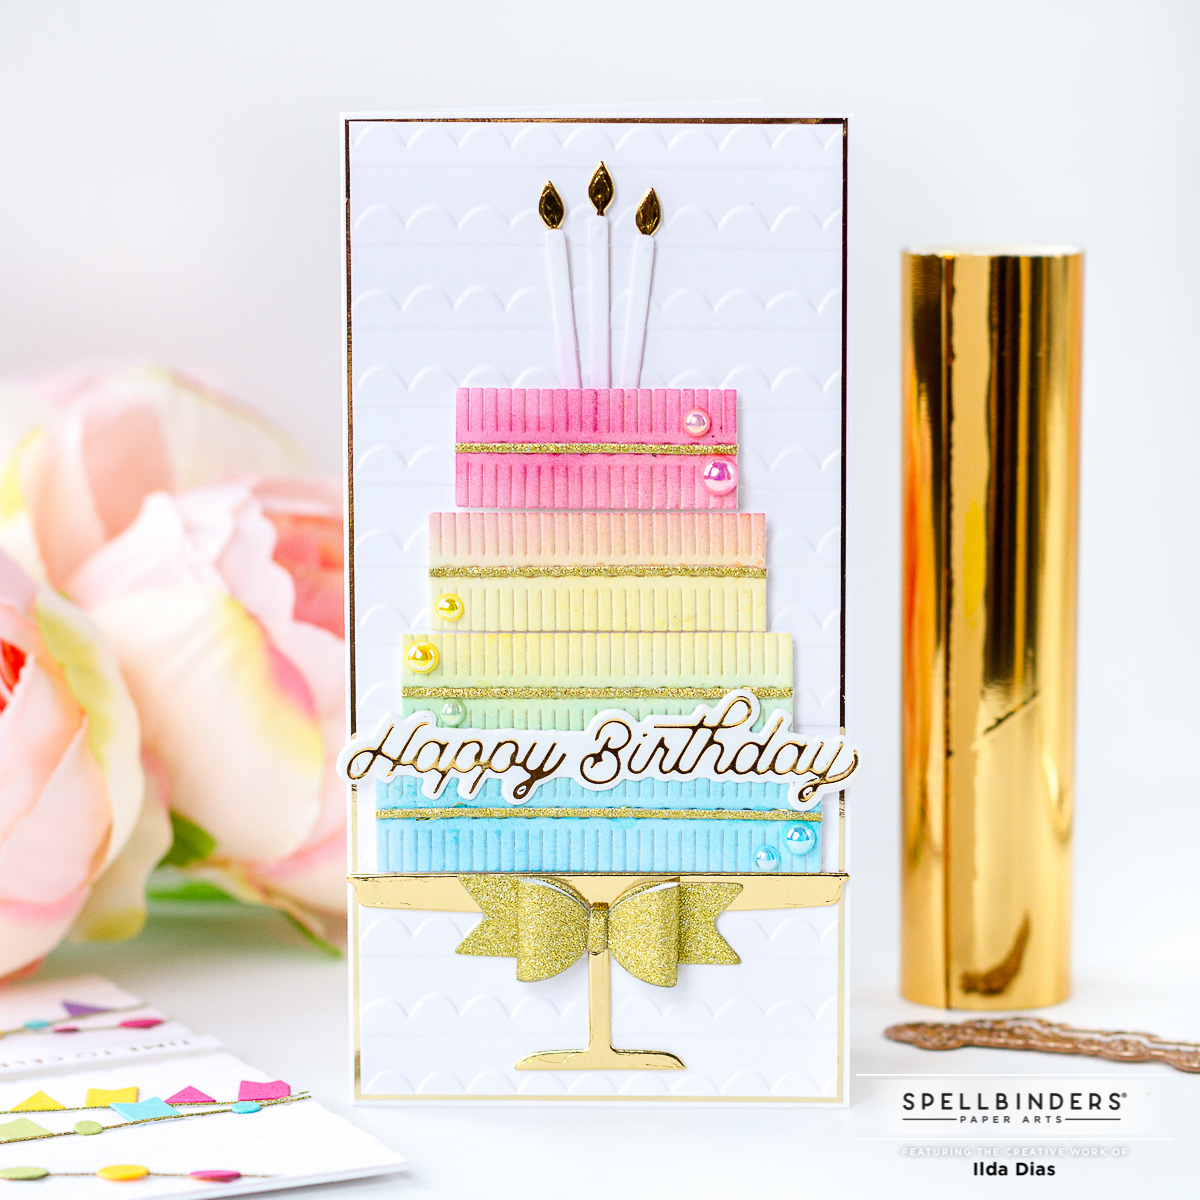 I Love Doing All Things Crafty: Birthday Celebration Cards